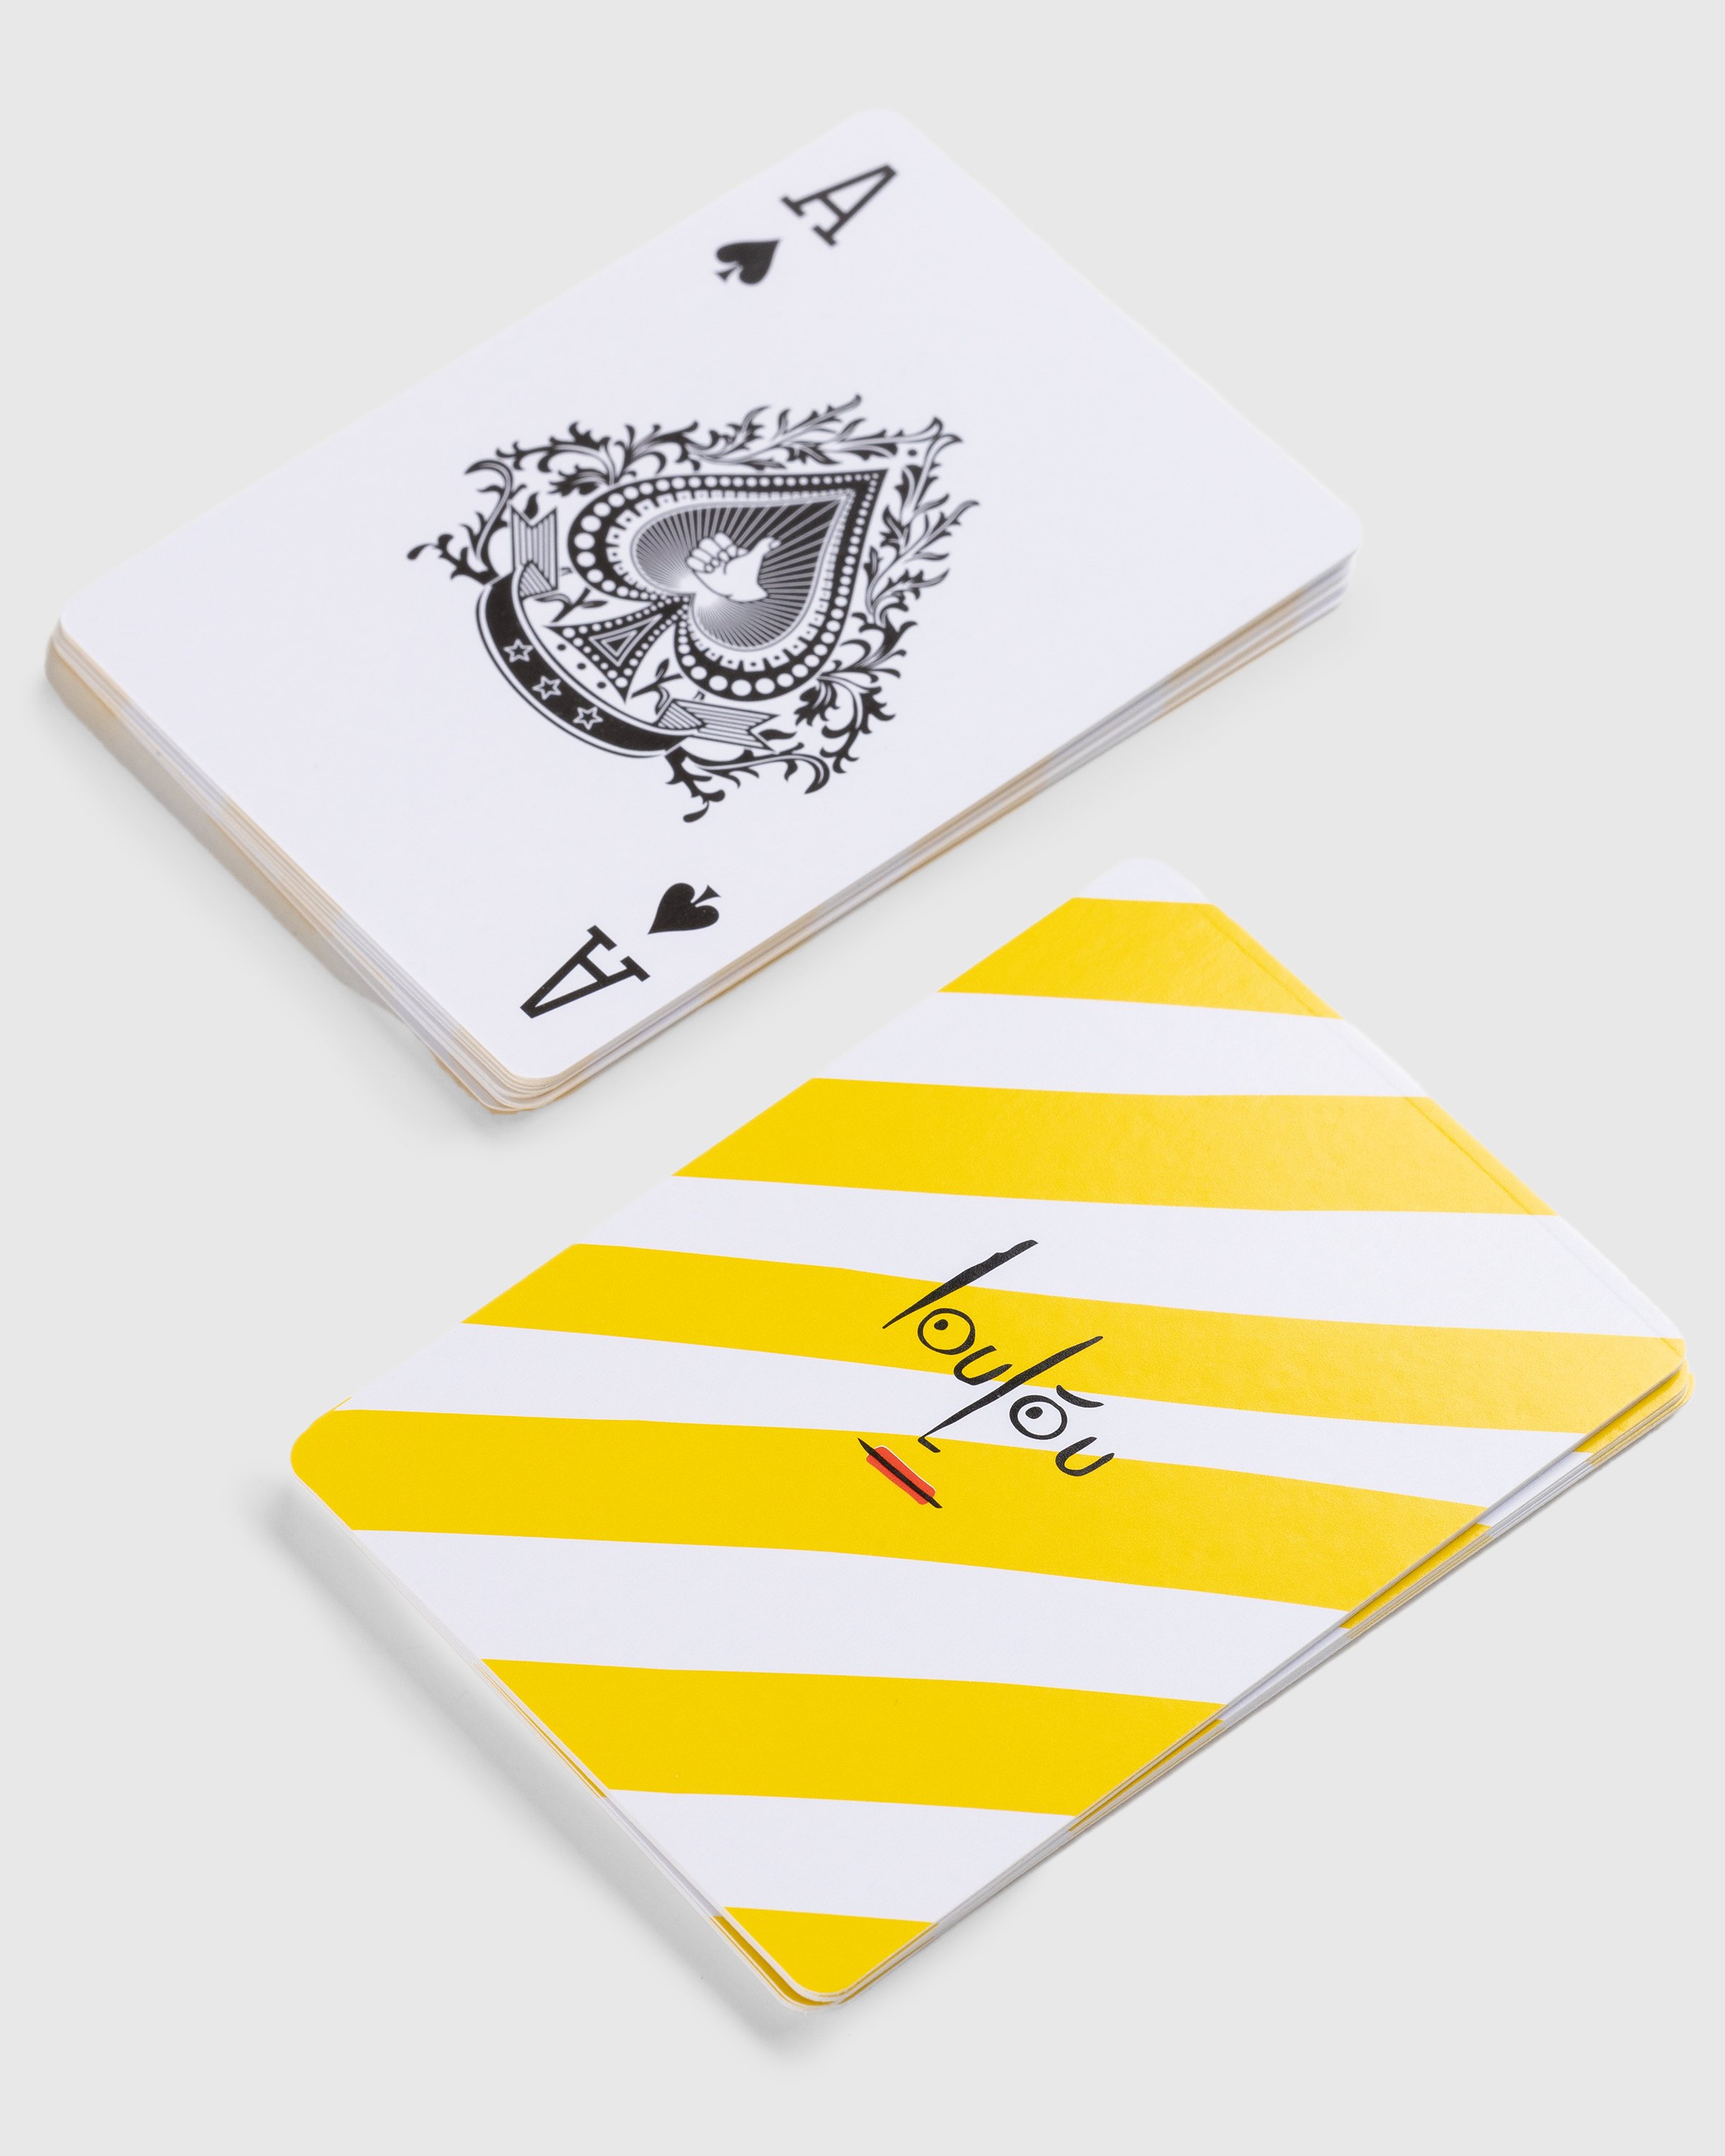 Loulou Paris - Card Game - Lifestyle - Yellow - Image 3